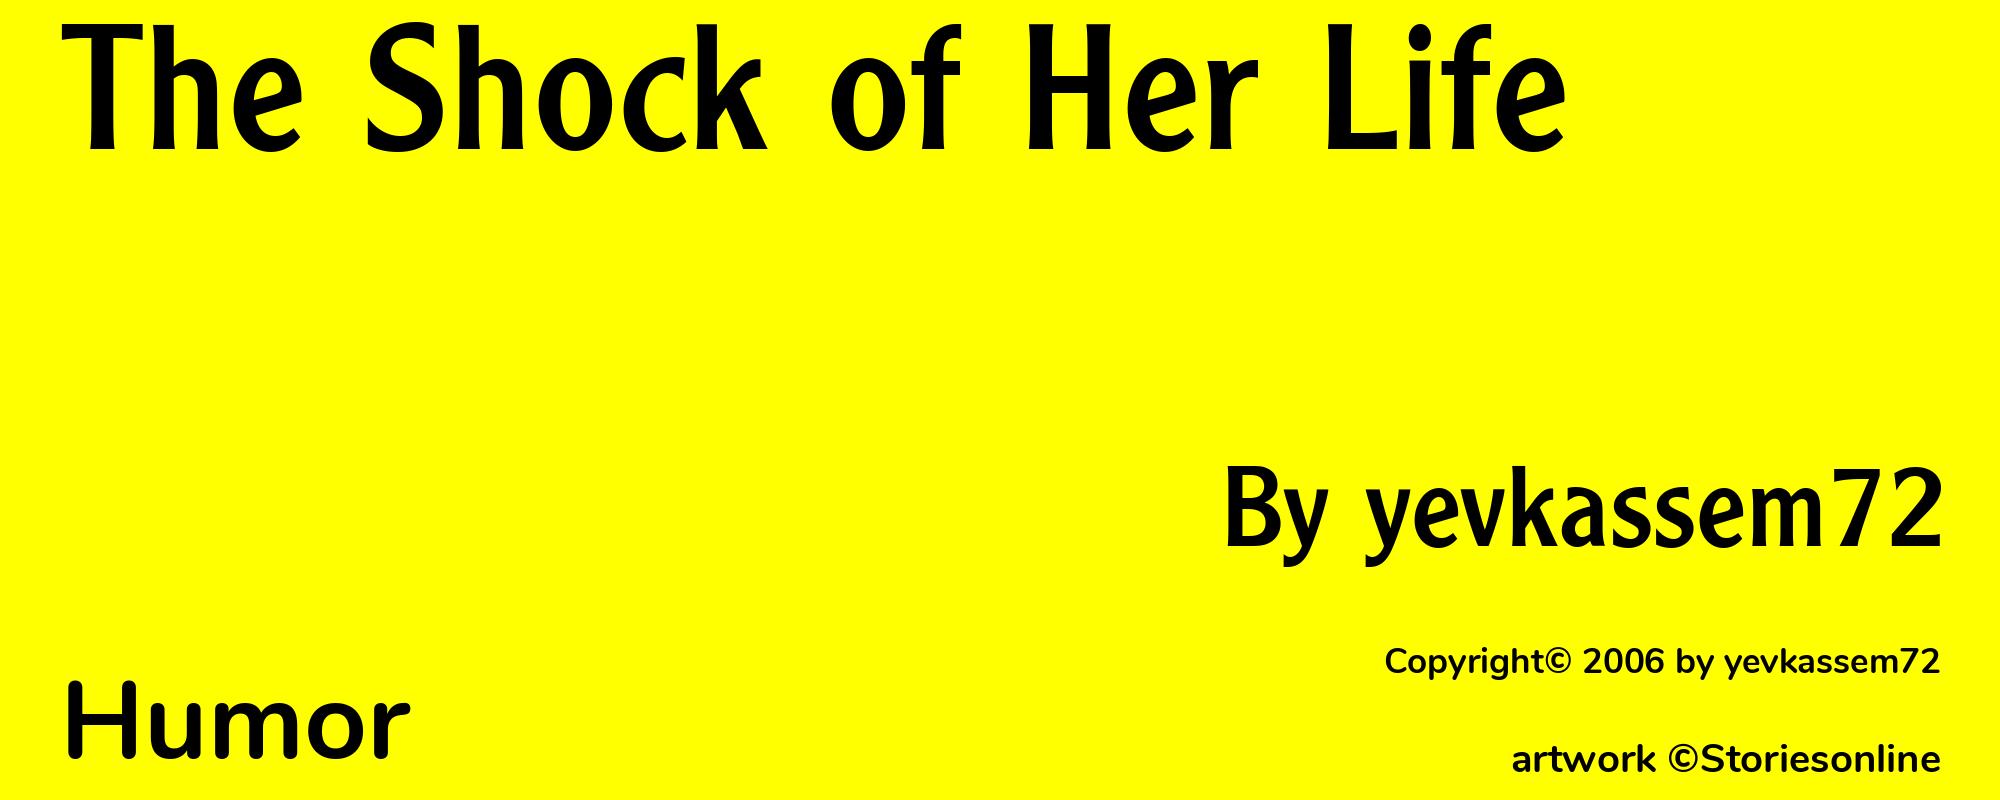 The Shock of Her Life - Cover